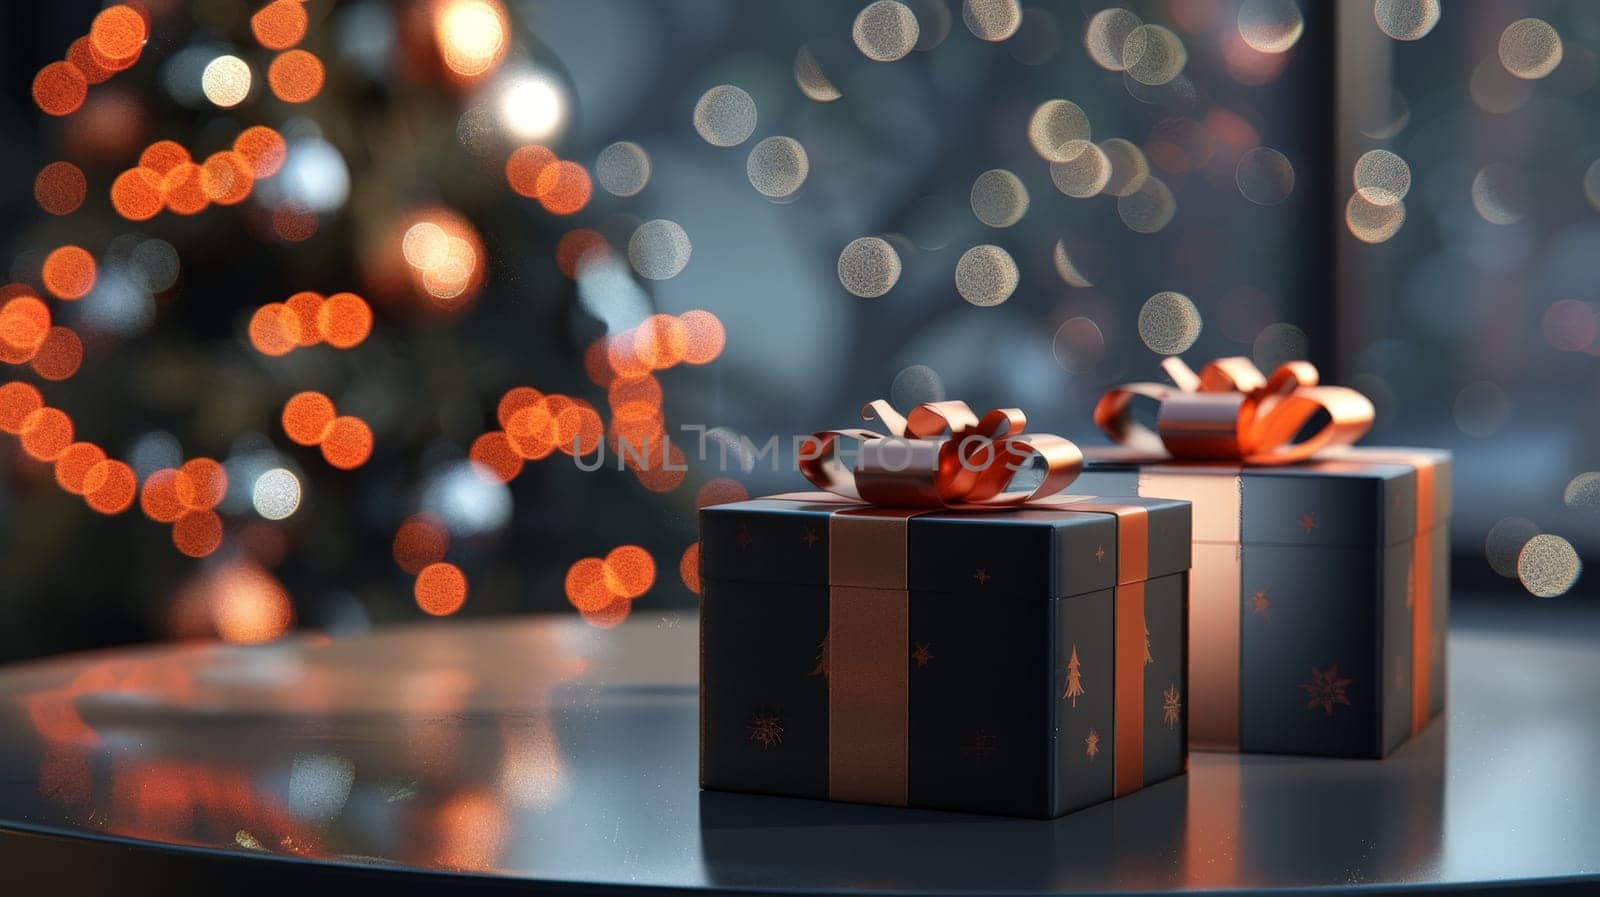 Two gold gift boxes on a table, Perfect for holiday and celebration concepts.